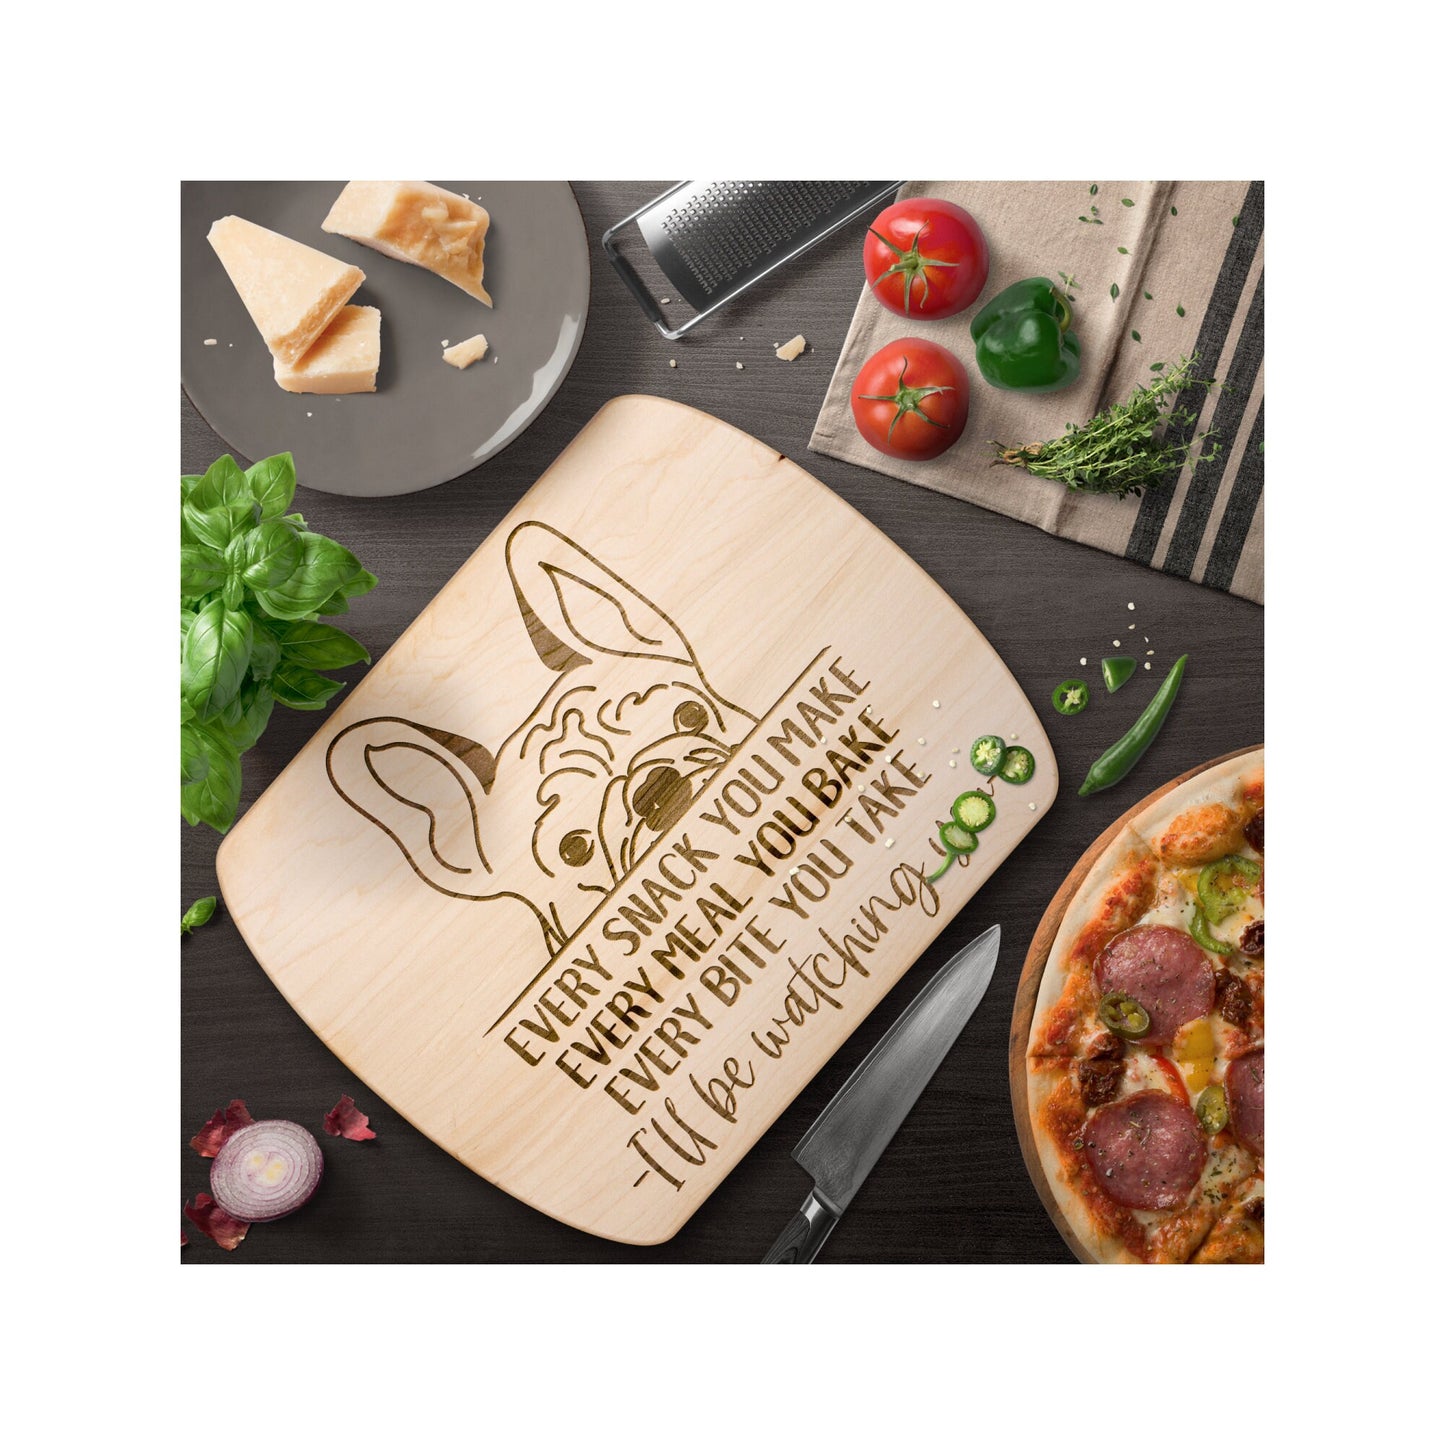 French Bulldog Snack Funny Cutting Board for Dog Mom, Dog Lover Wood Serving Board, Charcuterie Board, Wooden Chopping Board Gifts for Him